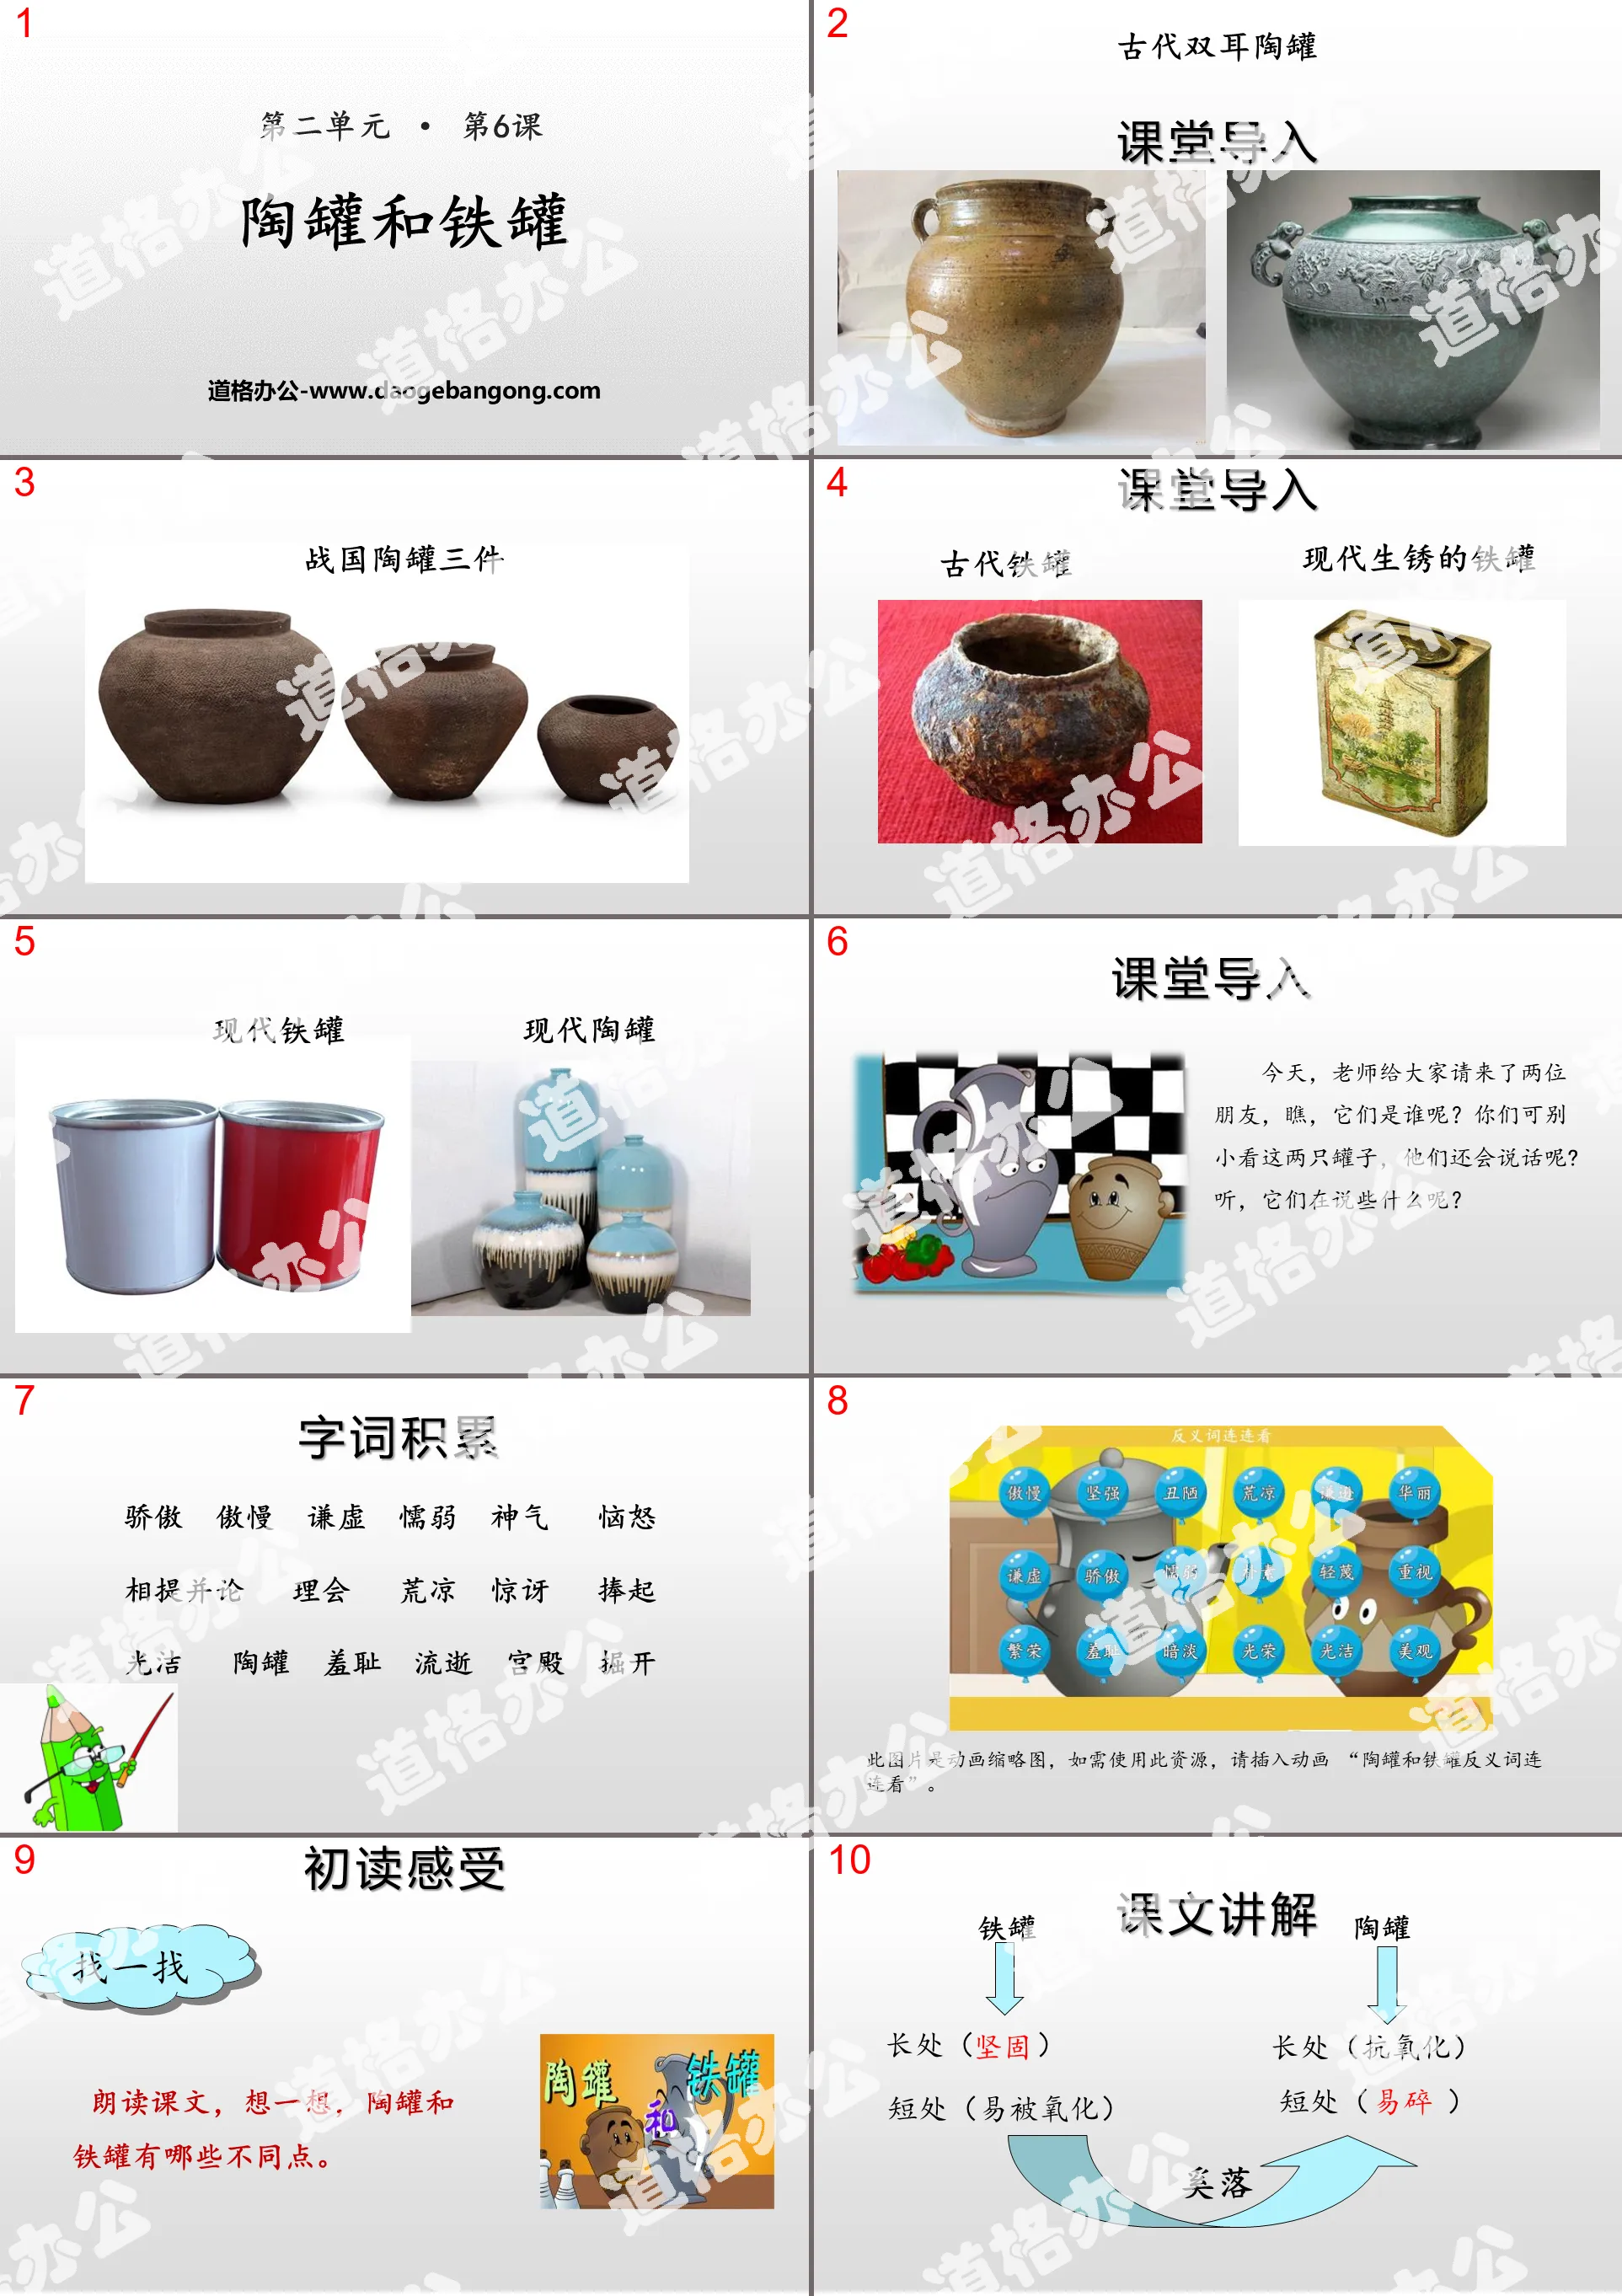 "Ceramic Pots and Iron Cans" PPT teaching courseware